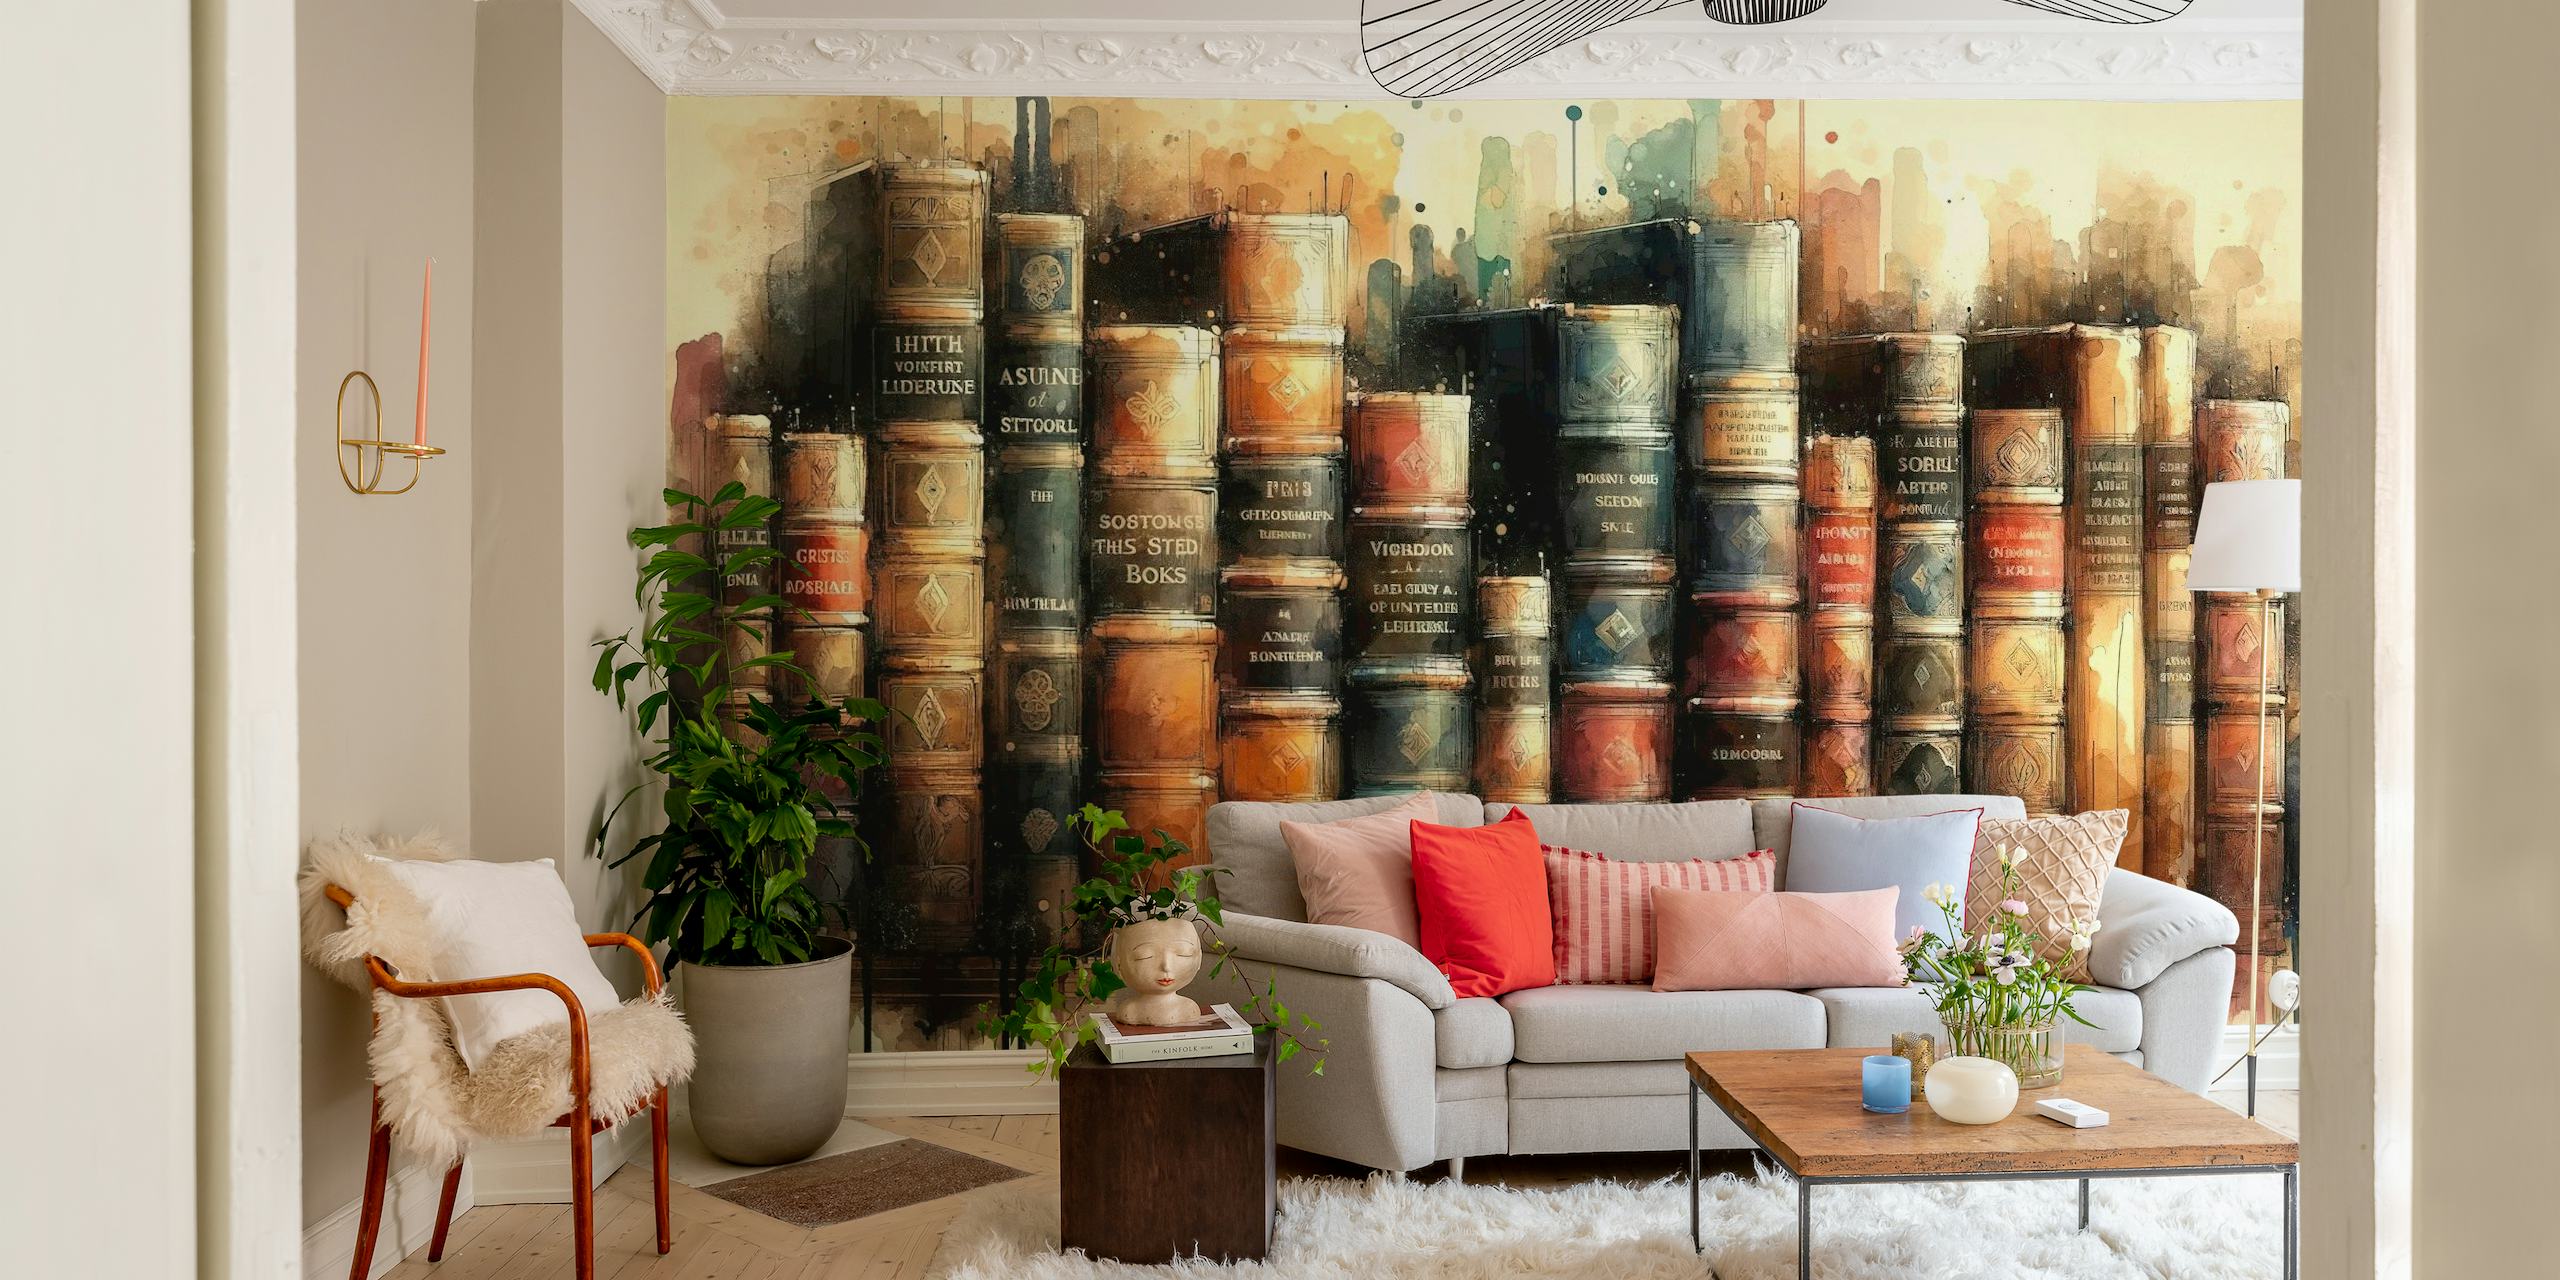 Aged Tomes Tell Tales of Timeless wallpaper